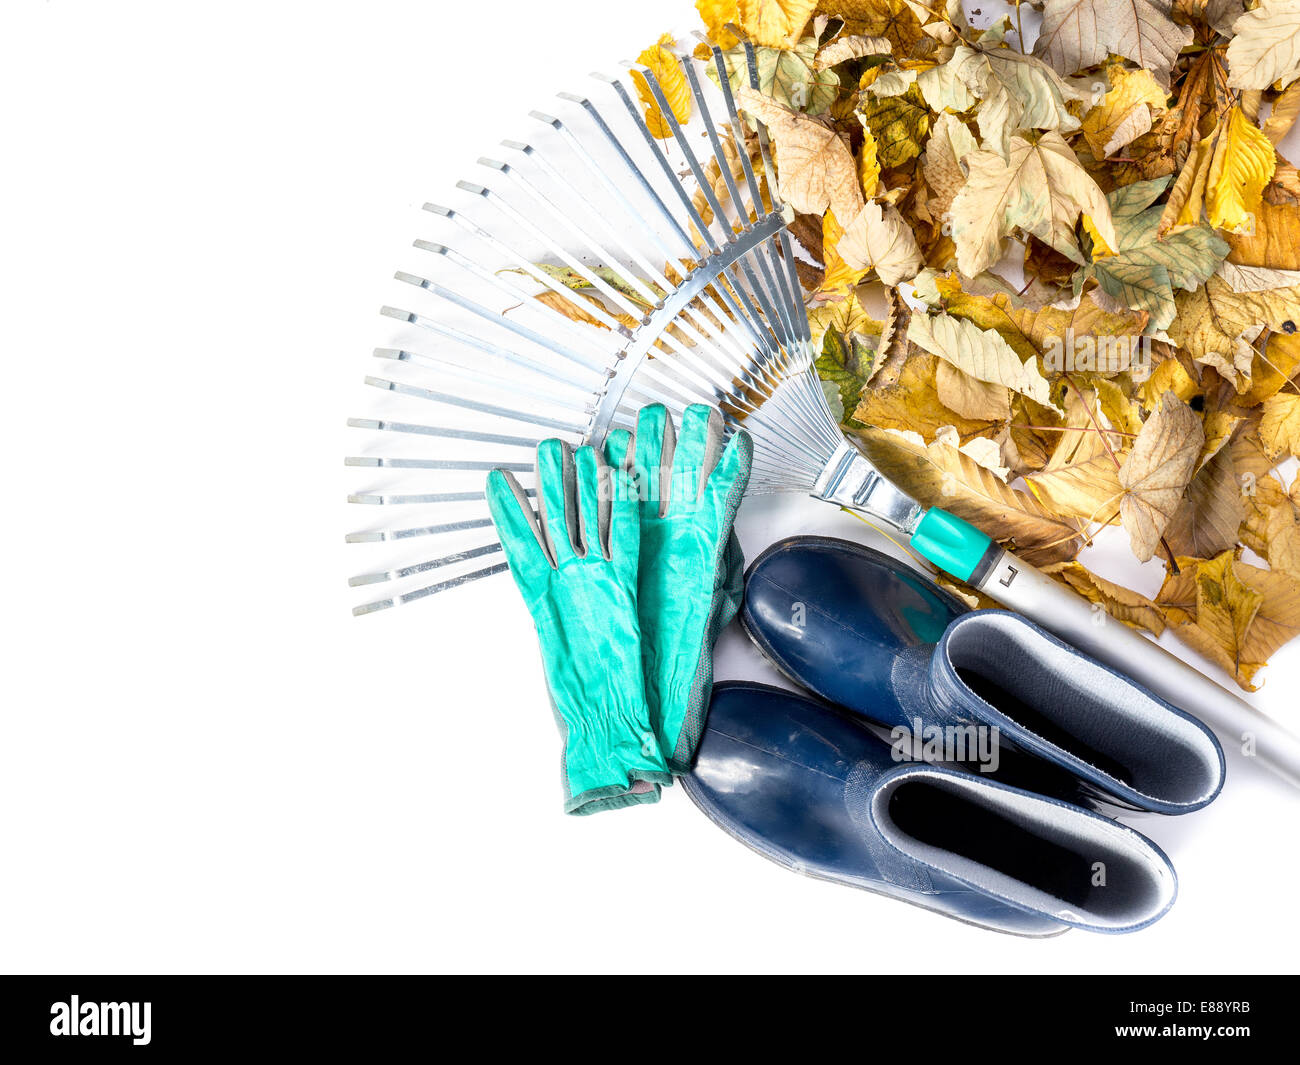 Pile of dead fall leaves, fan rake, pair of gumboots, and pair of gardening gloves all shot on white Stock Photo